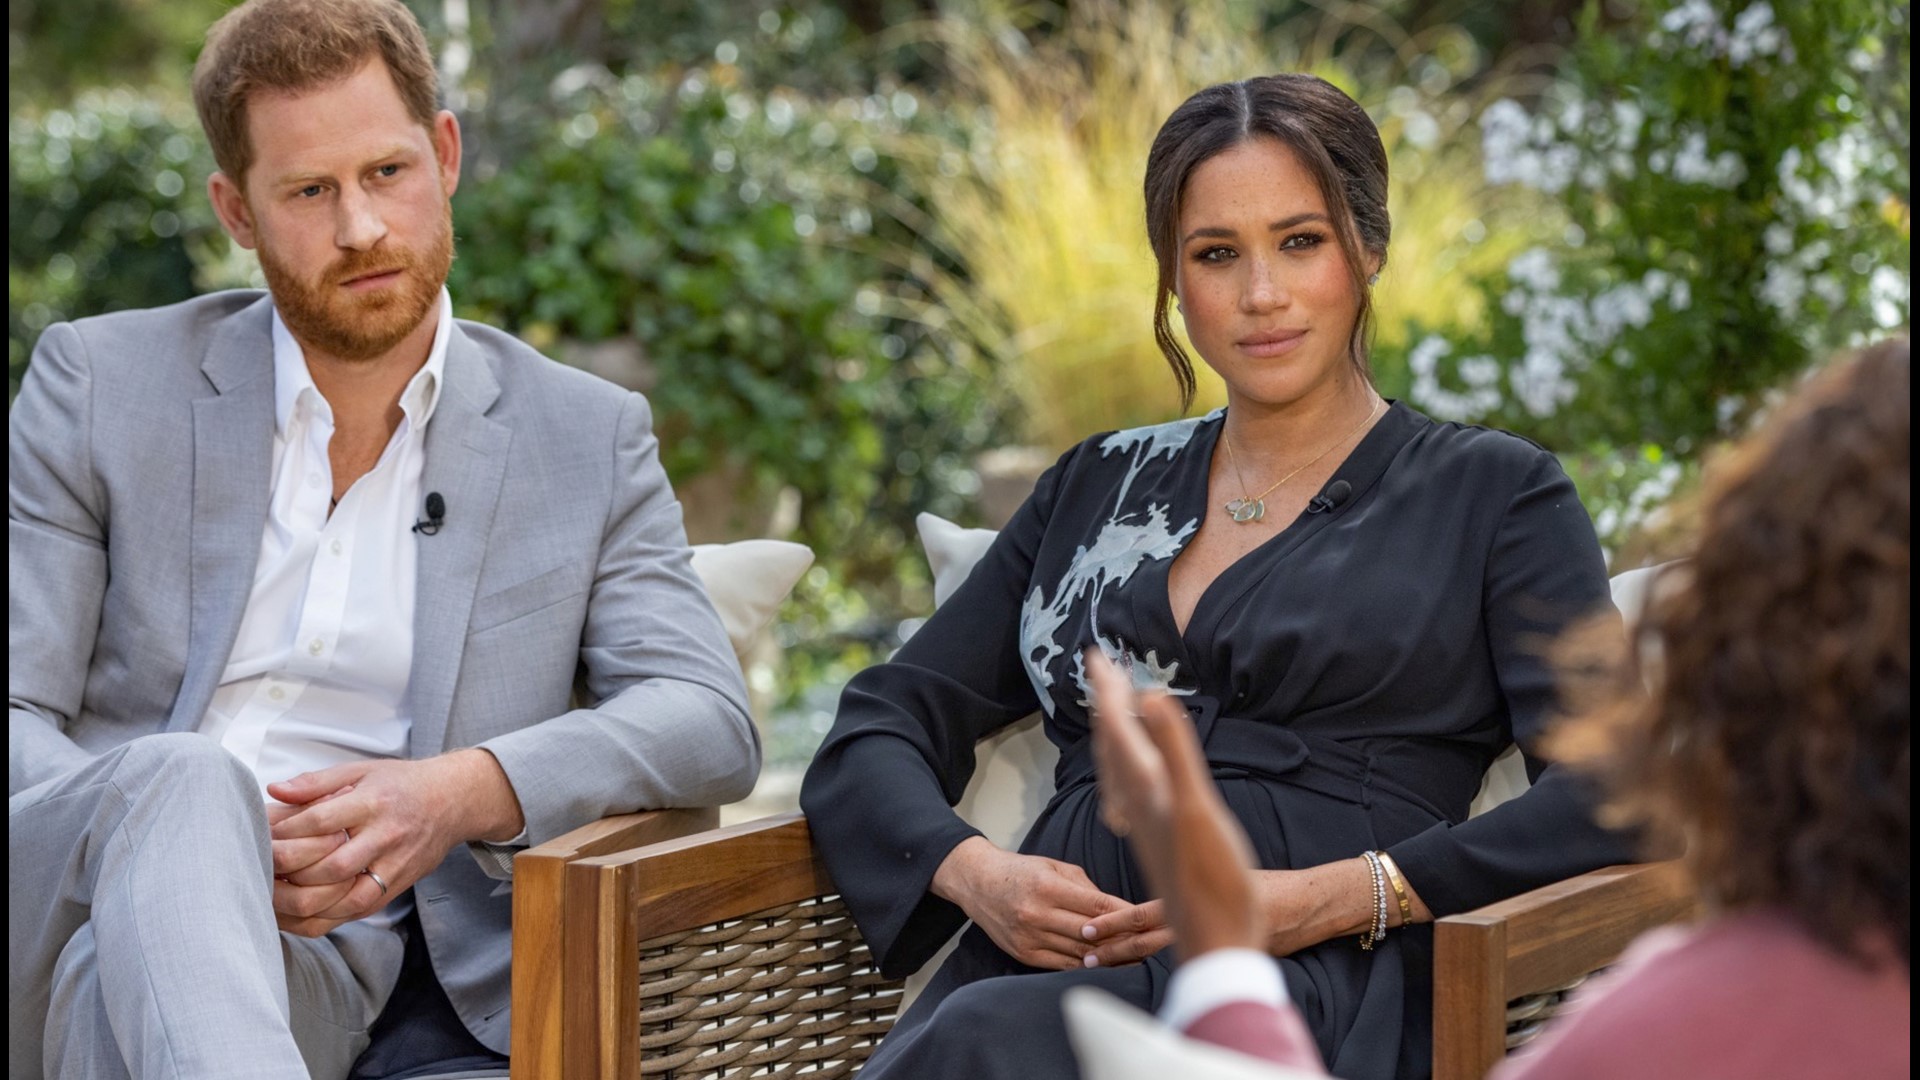 The Duchess of Sussex has launched a legal bid to stop the legal team from deposing husband Prince Harry and father Thomas Markle. Veuer's Chloe Hurst has the story!